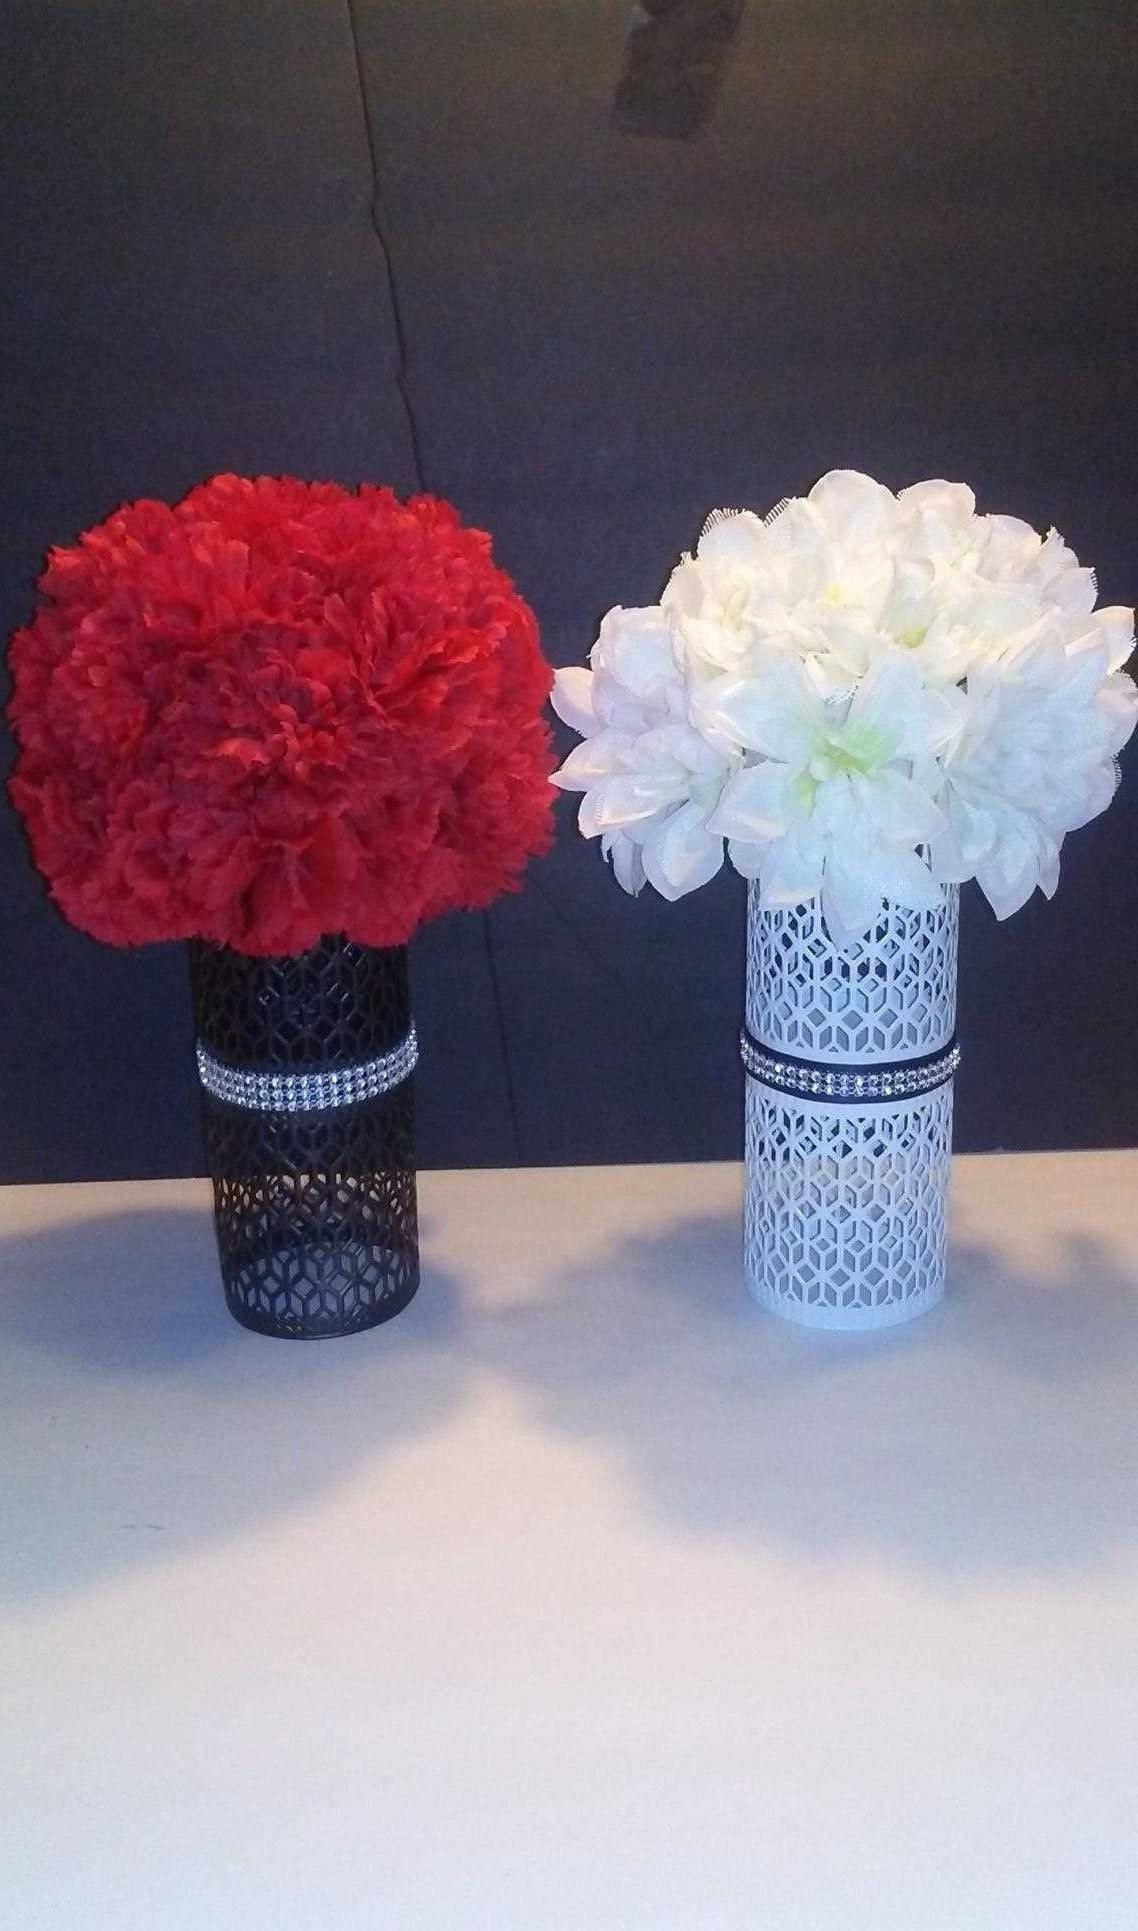 27 Popular Kate Spade Flower Vase 2024 free download kate spade flower vase of 10 fresh crystal vase bogekompresorturkiye com within wedding floral centerpieces awesome dollar tree wedding decorations awesome h vases dollar vase i 0d